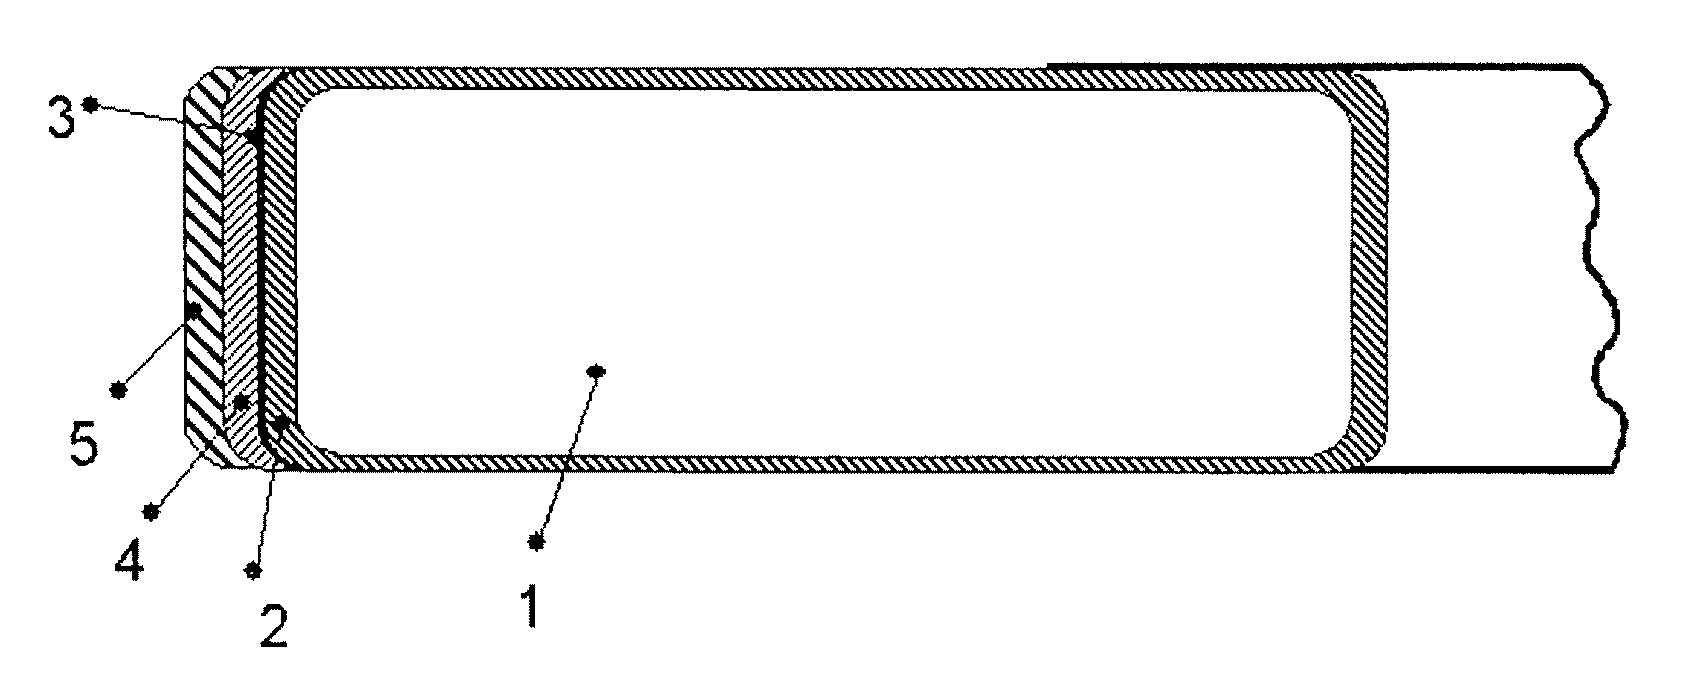 Piston ring with chromium nitride coating for internal combustion engines